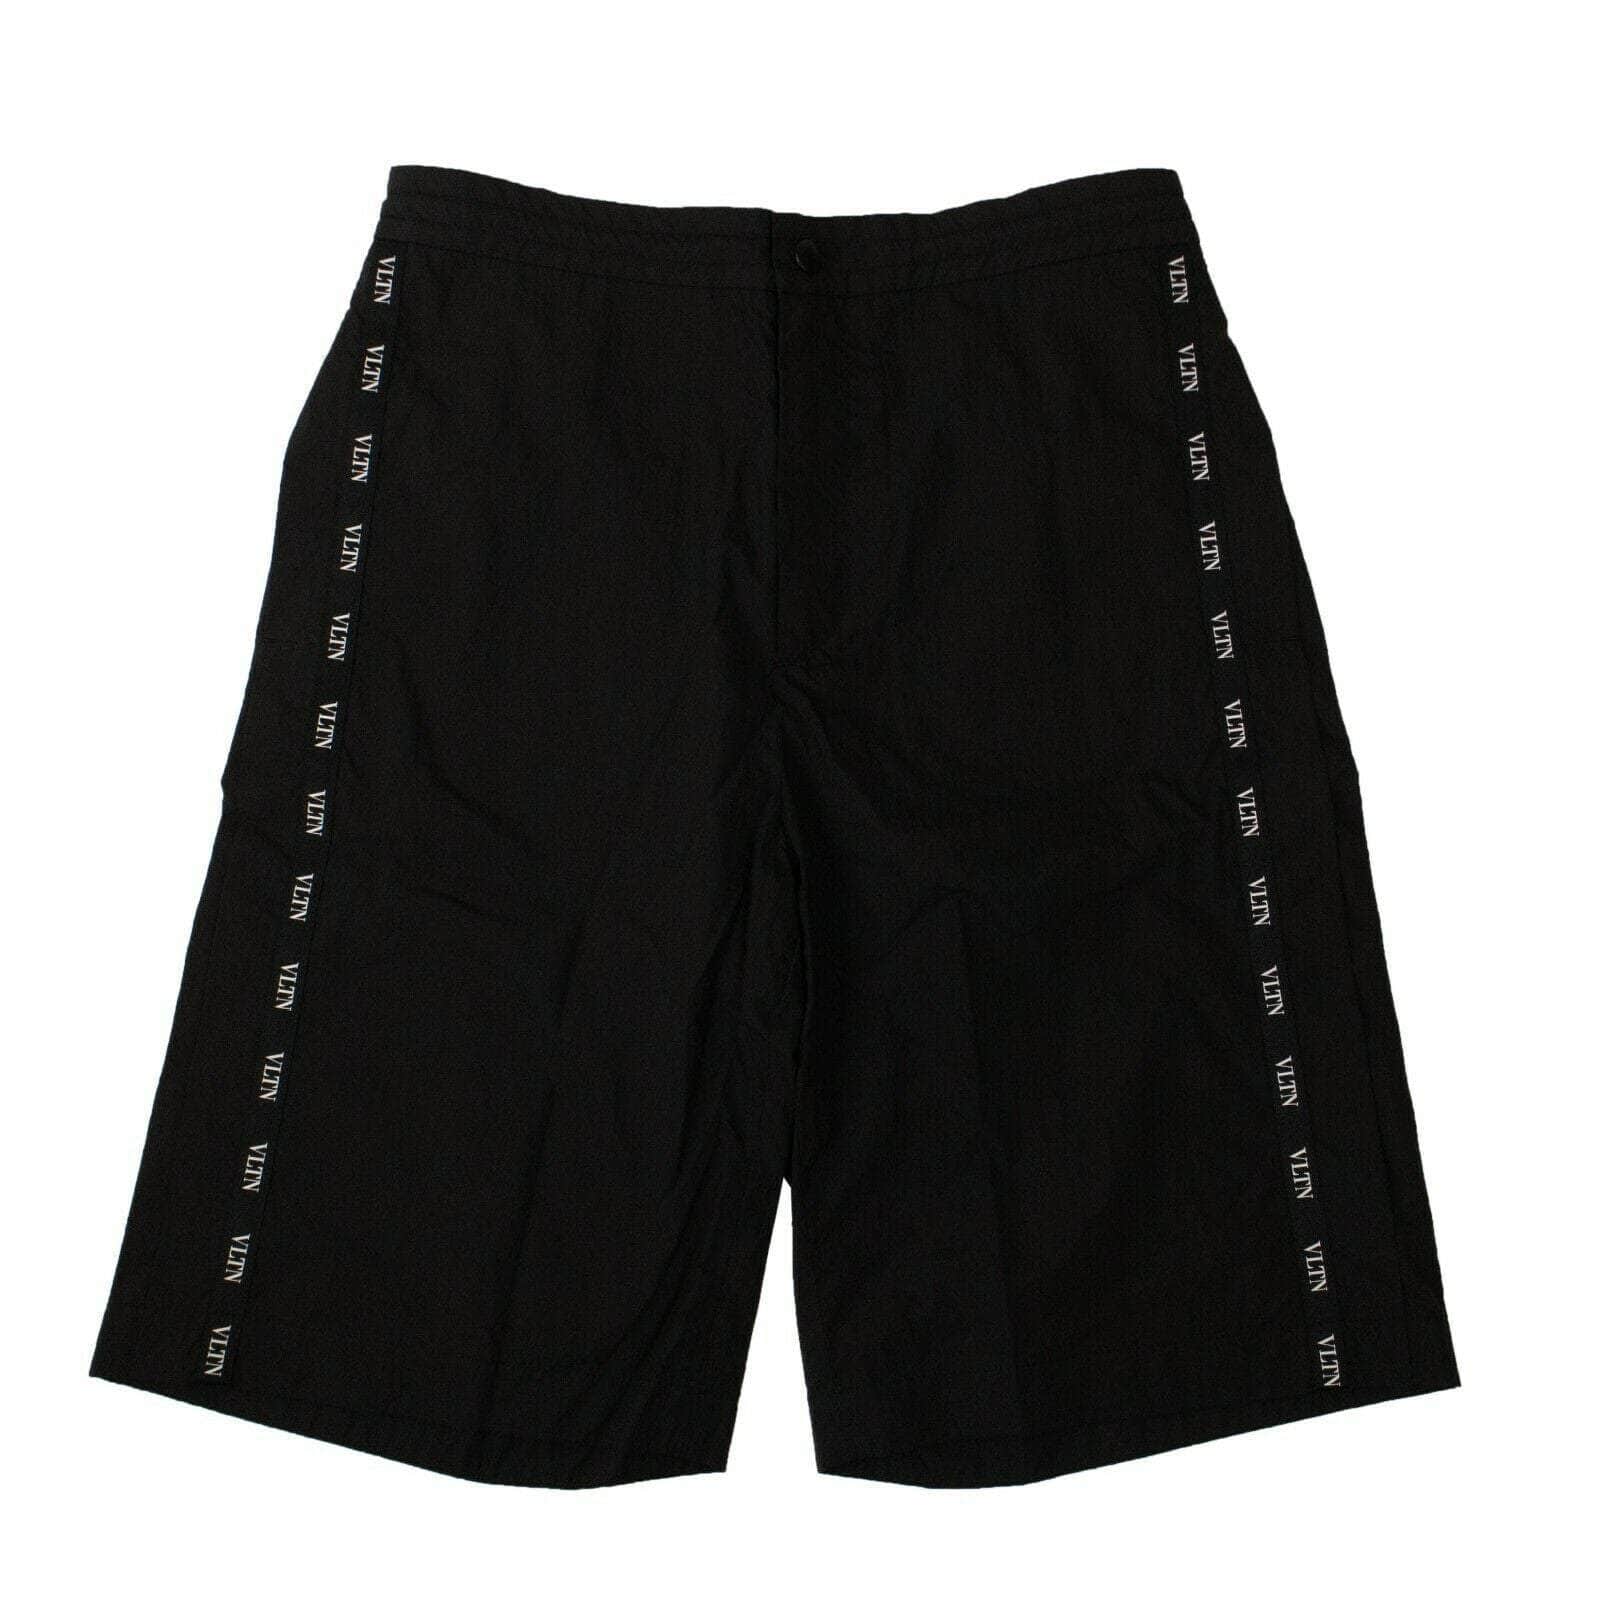 Valentino channelenable-all, chicmi, couponcollection, gender-mens, main-clothing, newarrival2 46 Men's Black Bermuda Shorts 95-VLT-1003/46 95-VLT-1003/46